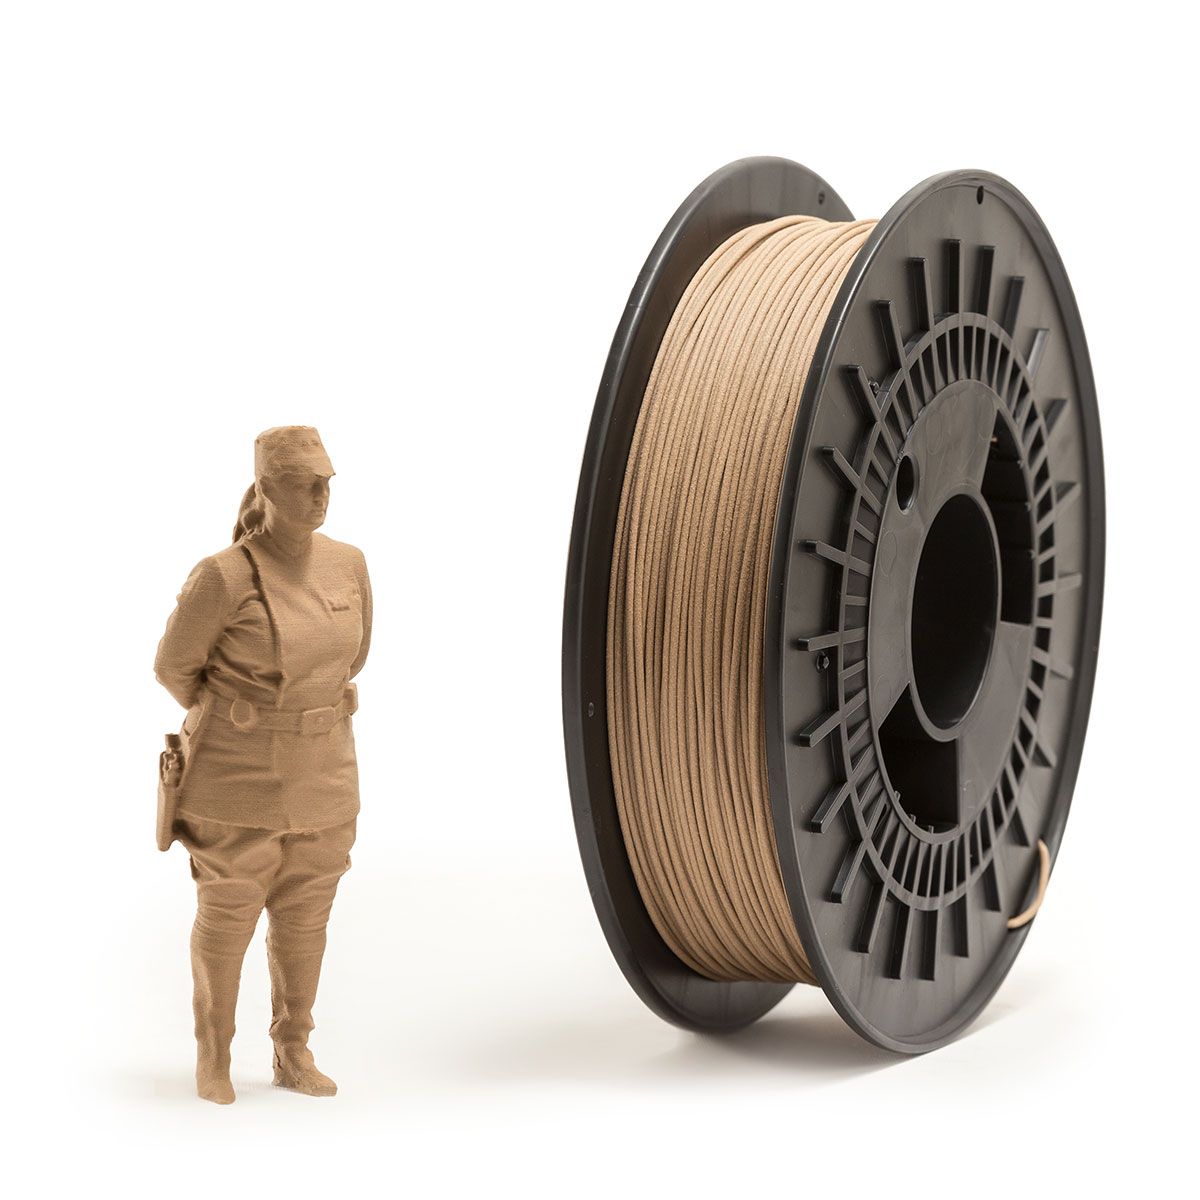 EUMAKERS Store PLA Woodfir